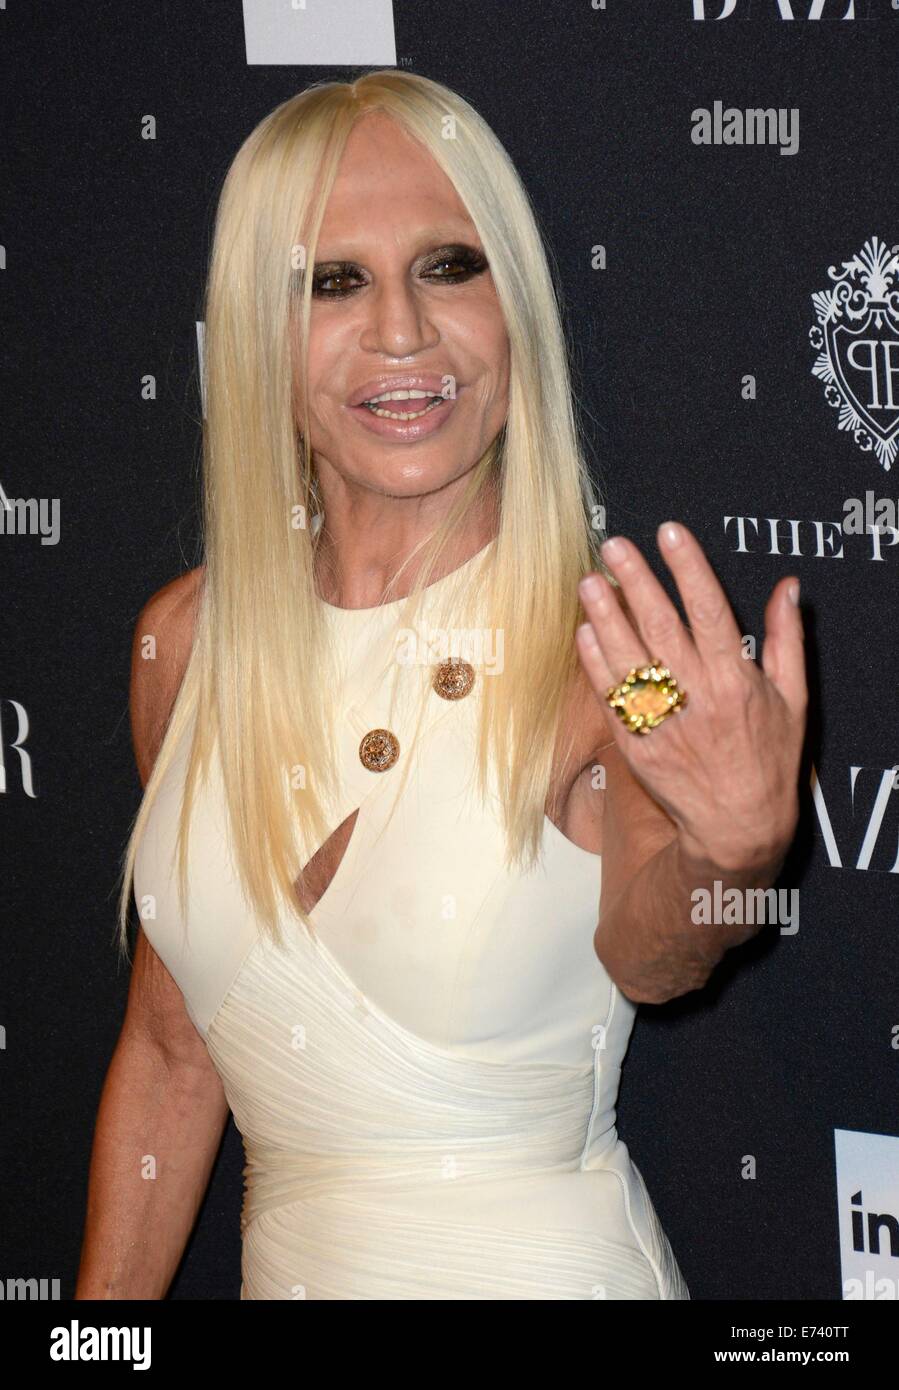 New York, NY, USA. 5th Sep, 2014. Donatella Versace at arrivals for  Harper's Bazaar Celebrates ICONS by Carine Roitfeld, The Plaza Hotel, New  York, NY September 5, 2014. Credit: Derek Storm/Everett Collection/Alamy